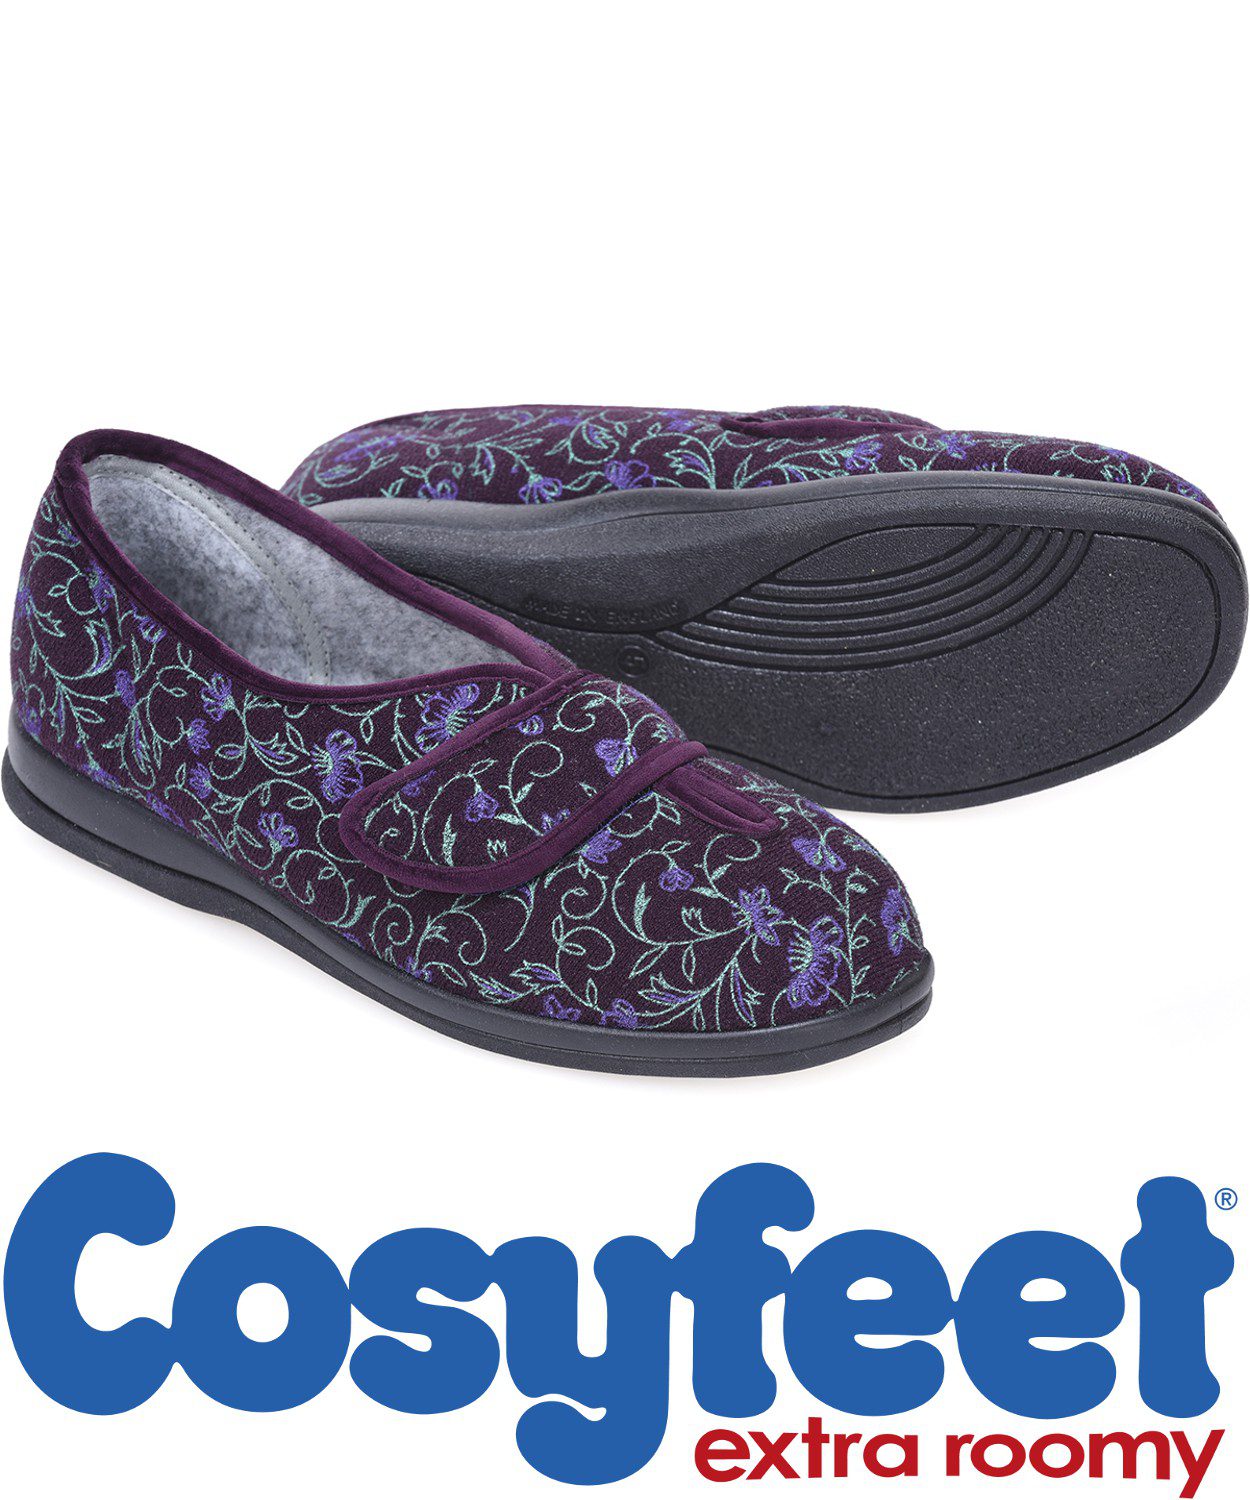 cosyfeet shoes